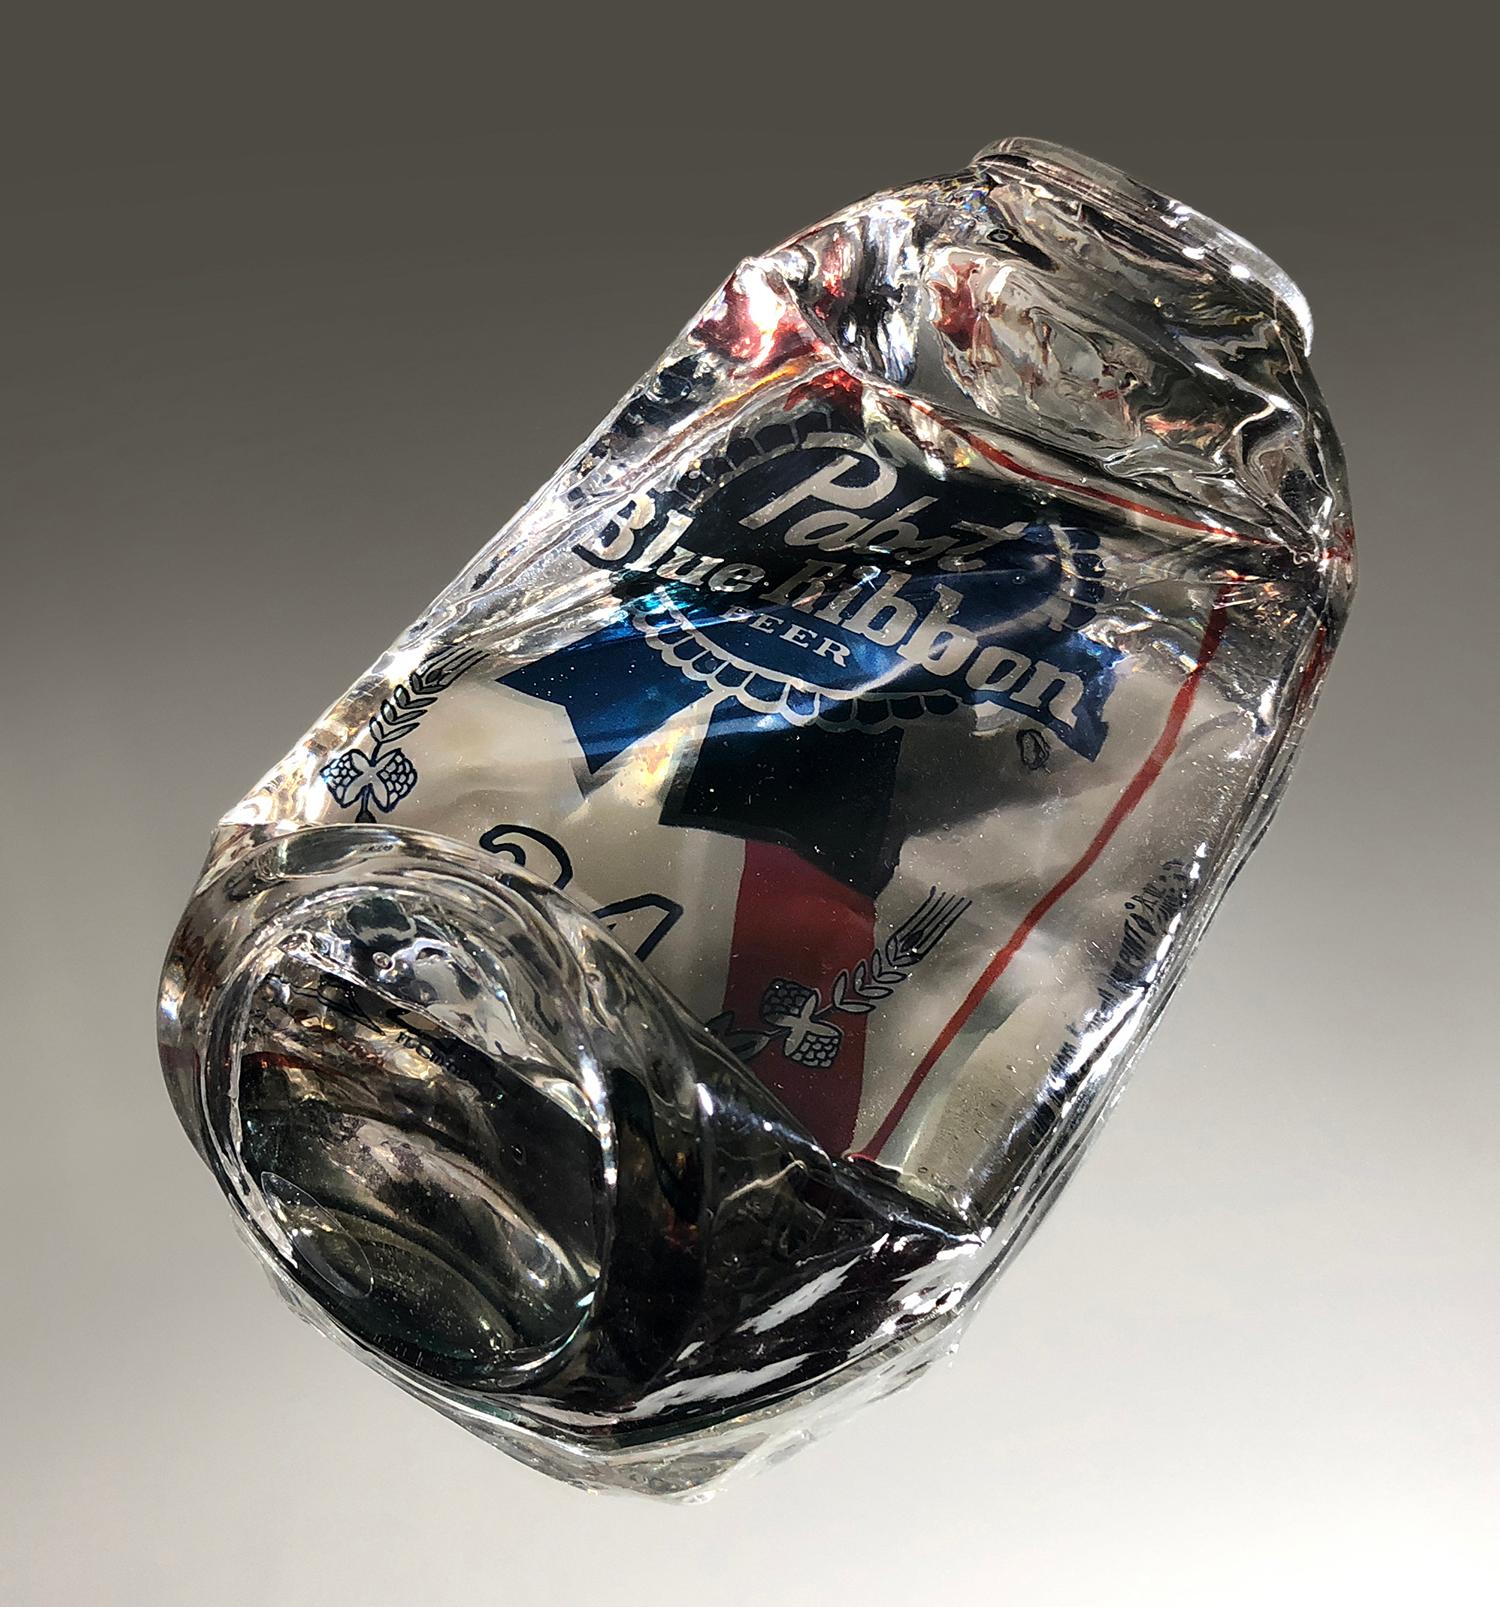 This is an editioned sculpture by Chris Bakay, titled "About Last Night" made with crystal clear casting resin and backed with an archival inkjet silkscreen.

Chris Bakay is a multidisciplinary visual artist living and working in Safety Harbor, FL.